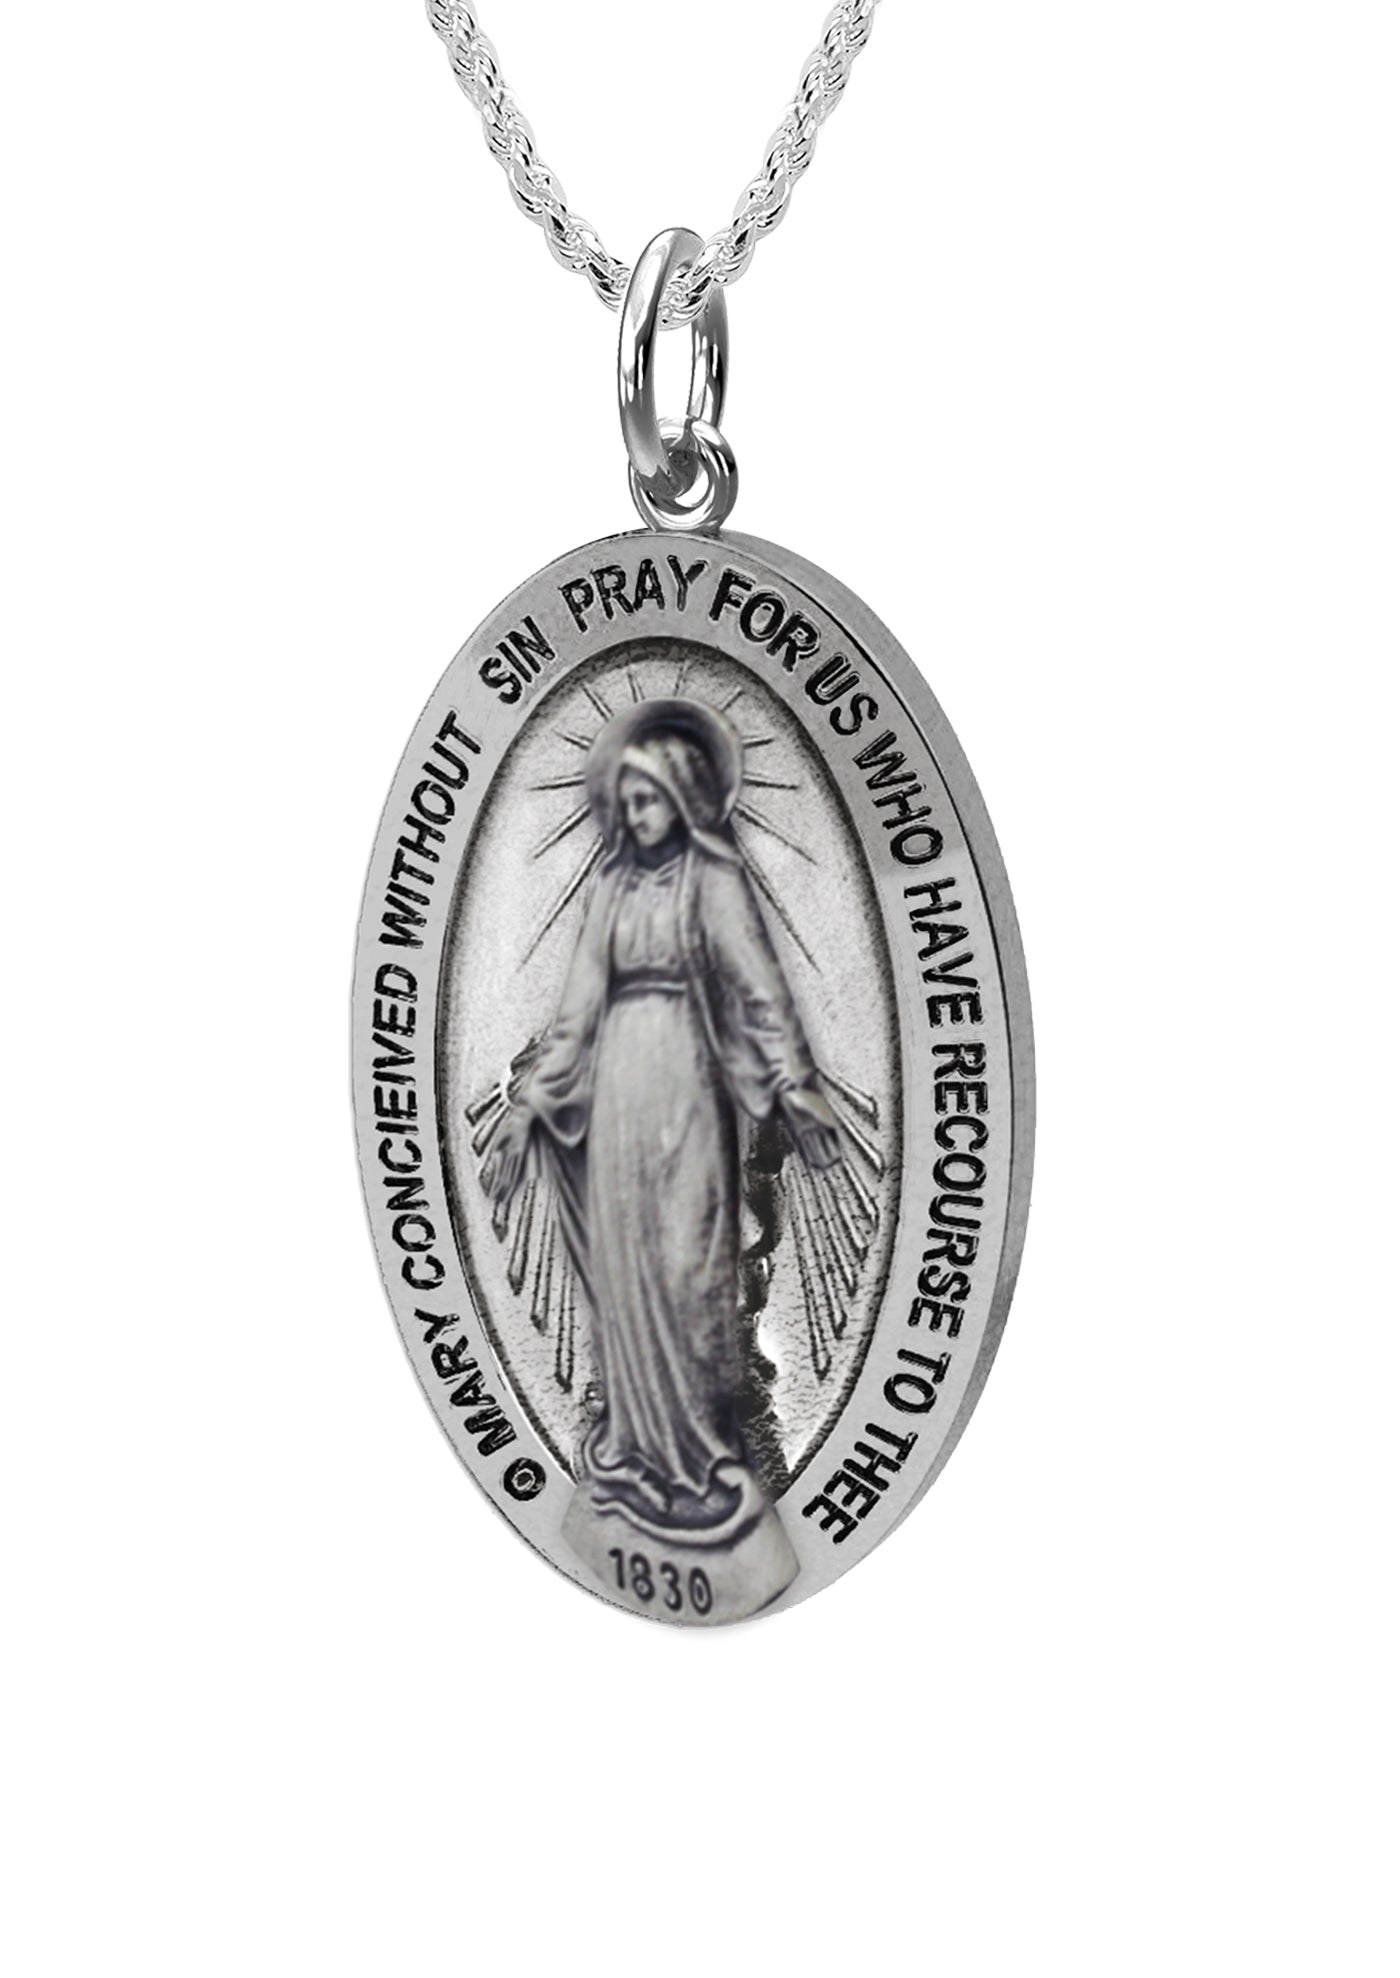 Virgin Mary Necklace - Silver Pendant in Antique Finish 20in 2.4mm Rope Chain